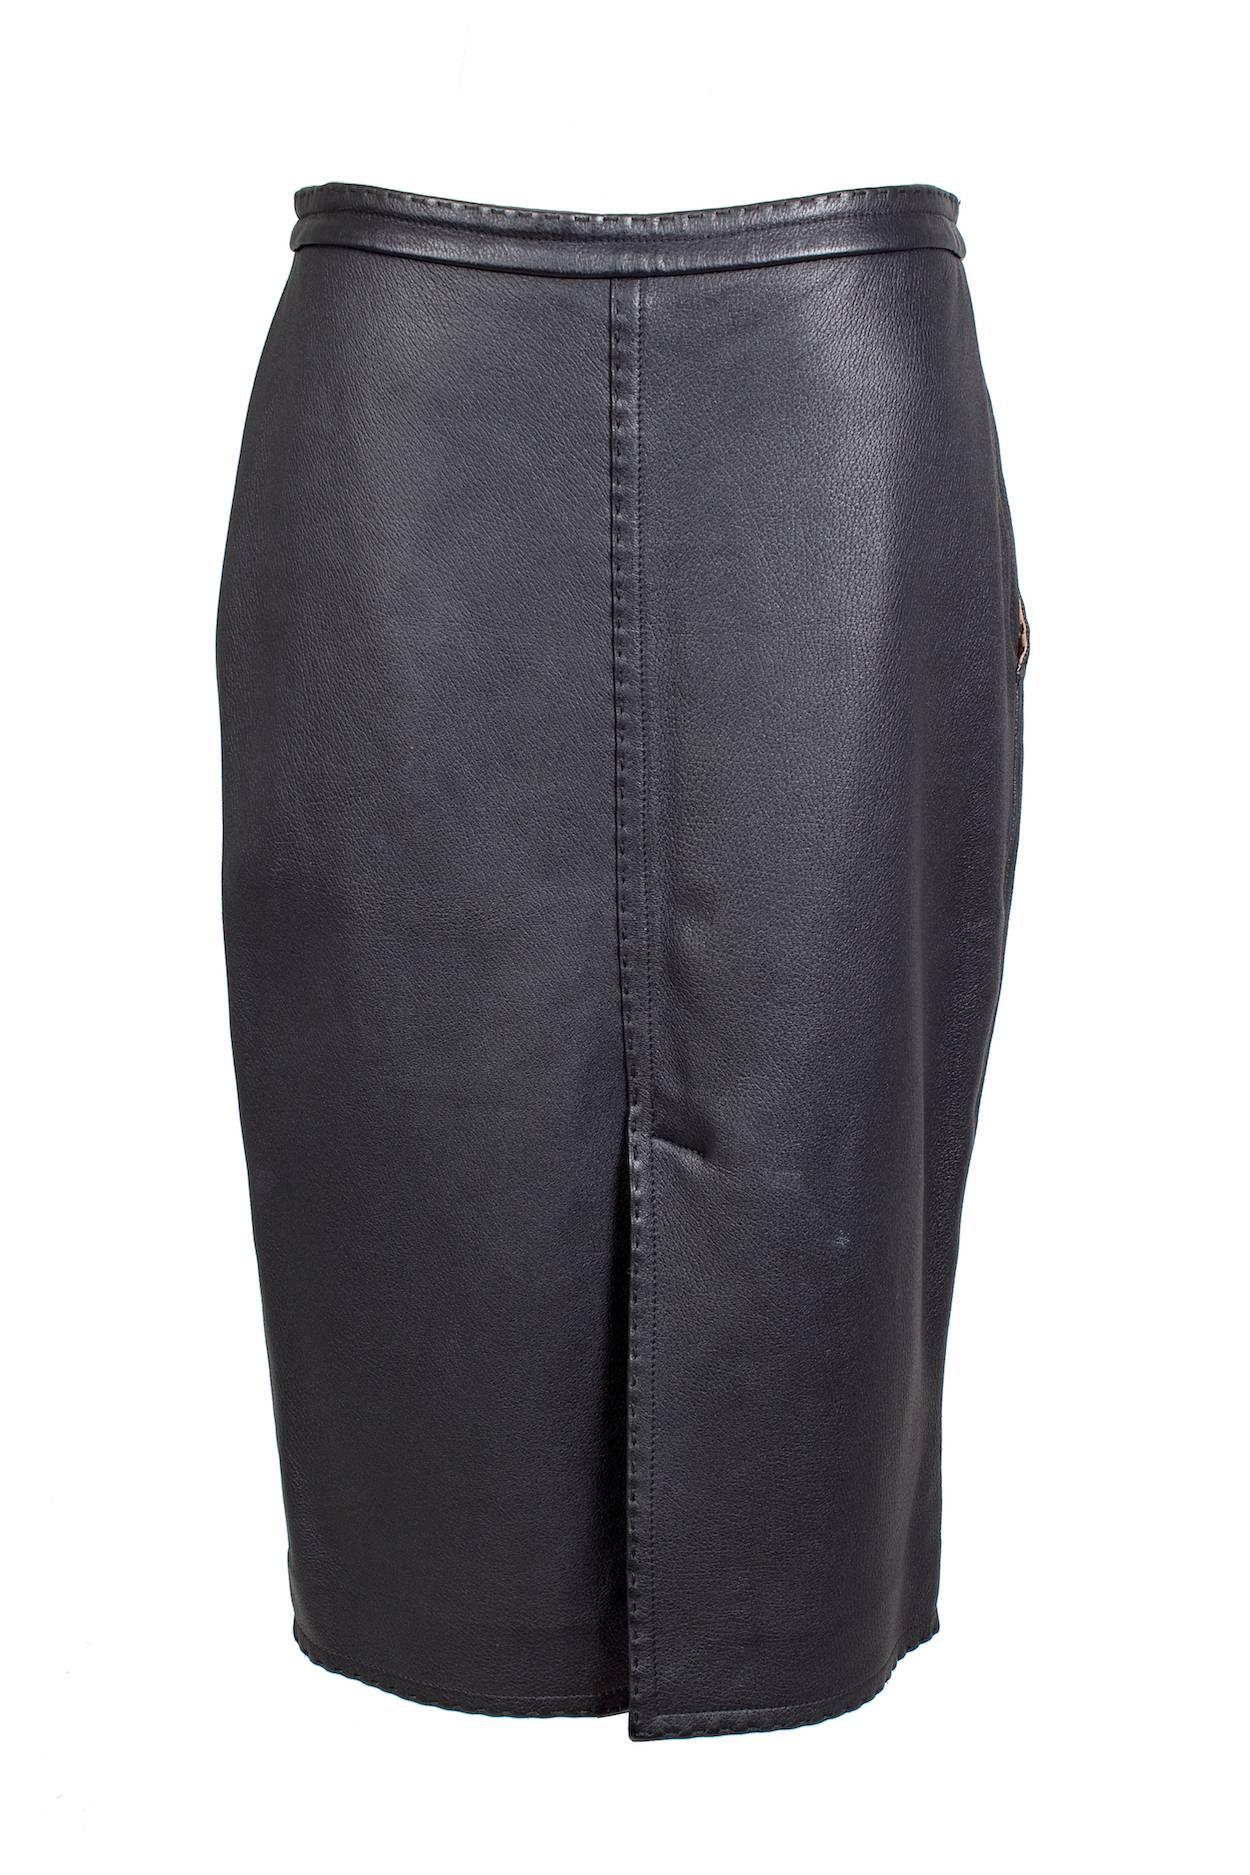 This a leather pencil skirt by Jean Paul Gaultier c. 1990s.  It features exposed stitching, a front zipper and button closure, and two waist pockets.  Lined in copper colored satin.